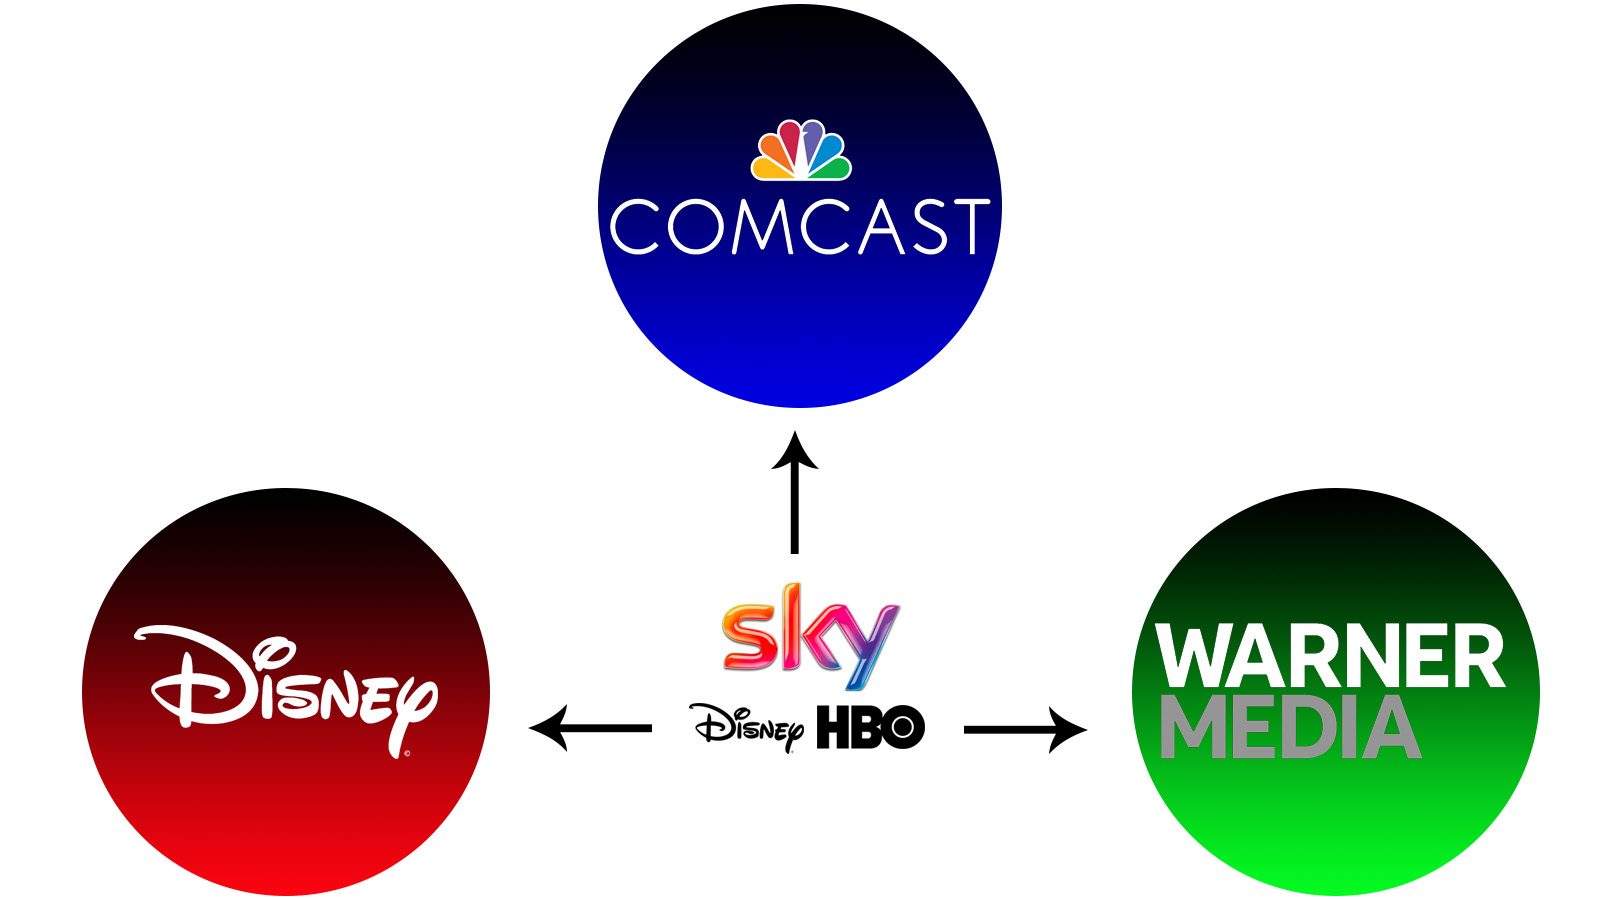 What Do Disney+ and HBO Max Mean for Sky?